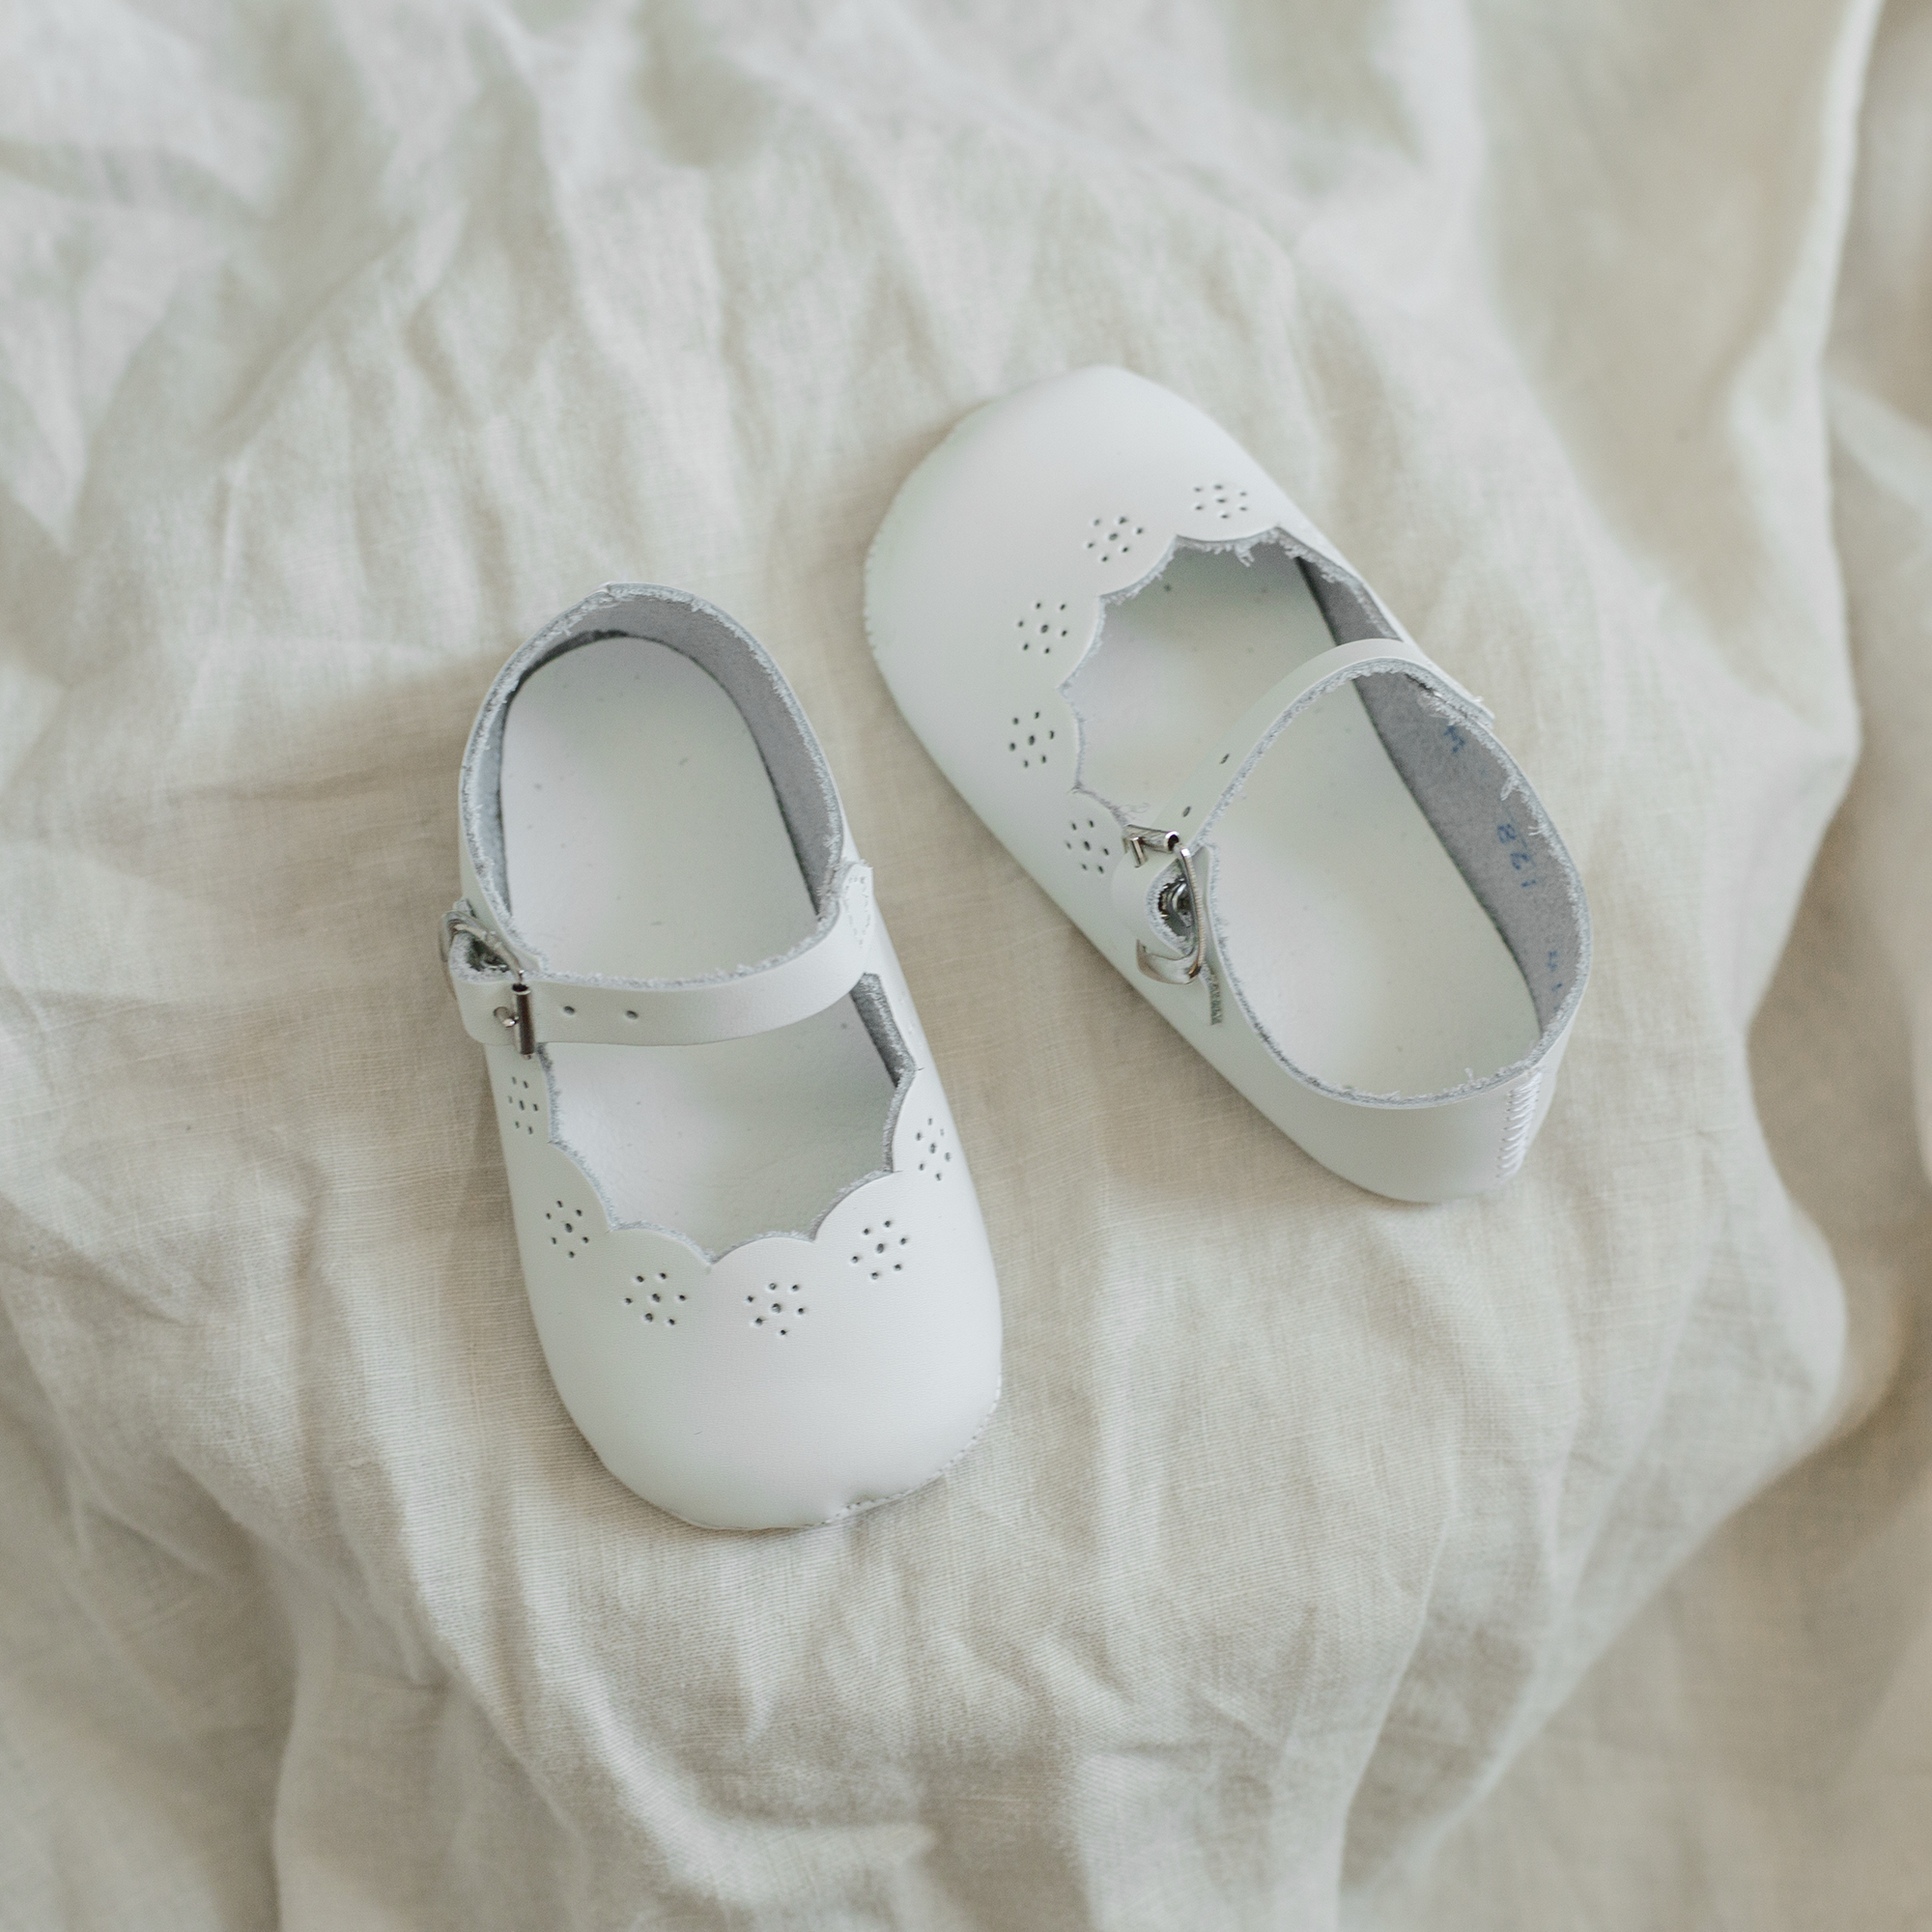 zimmerman-shoes-soft-soled-white-mary-jane-baby-footware-2.png